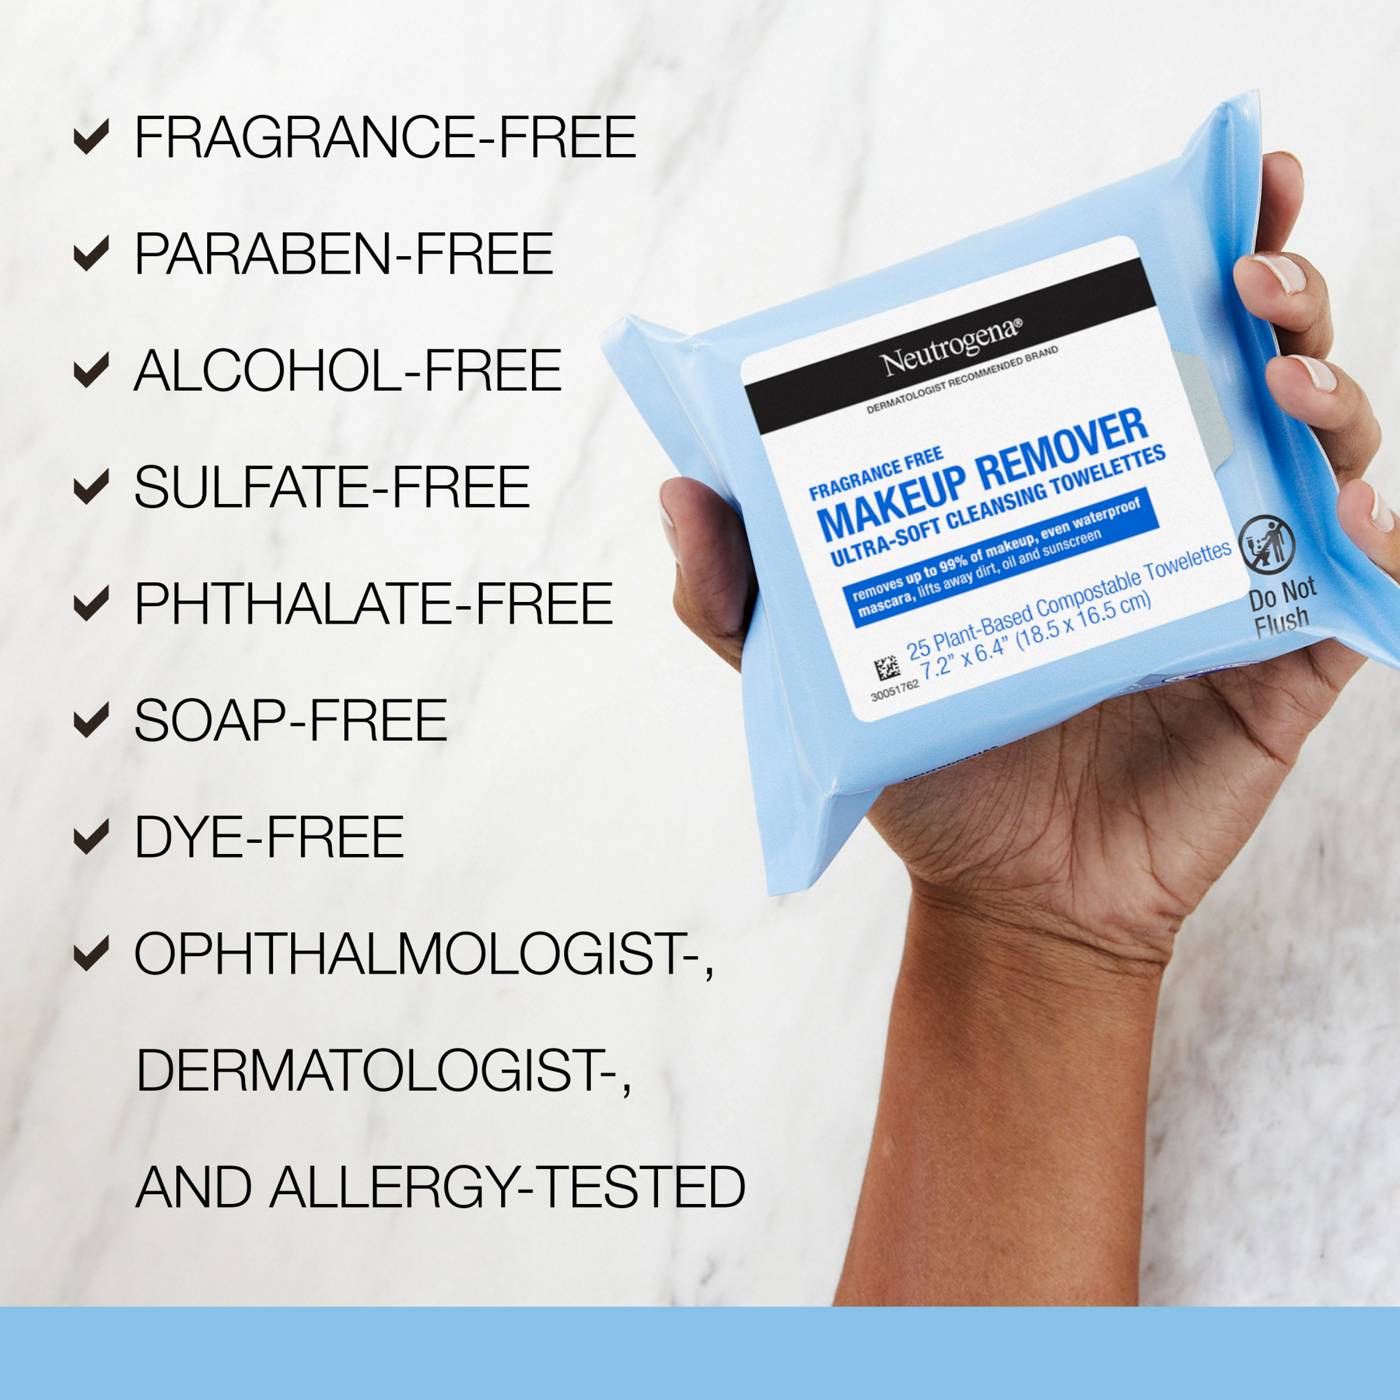 Neutrogena Makeup Remover Fragrance Free Cleansing Towelettes - Twin Pack; image 3 of 8